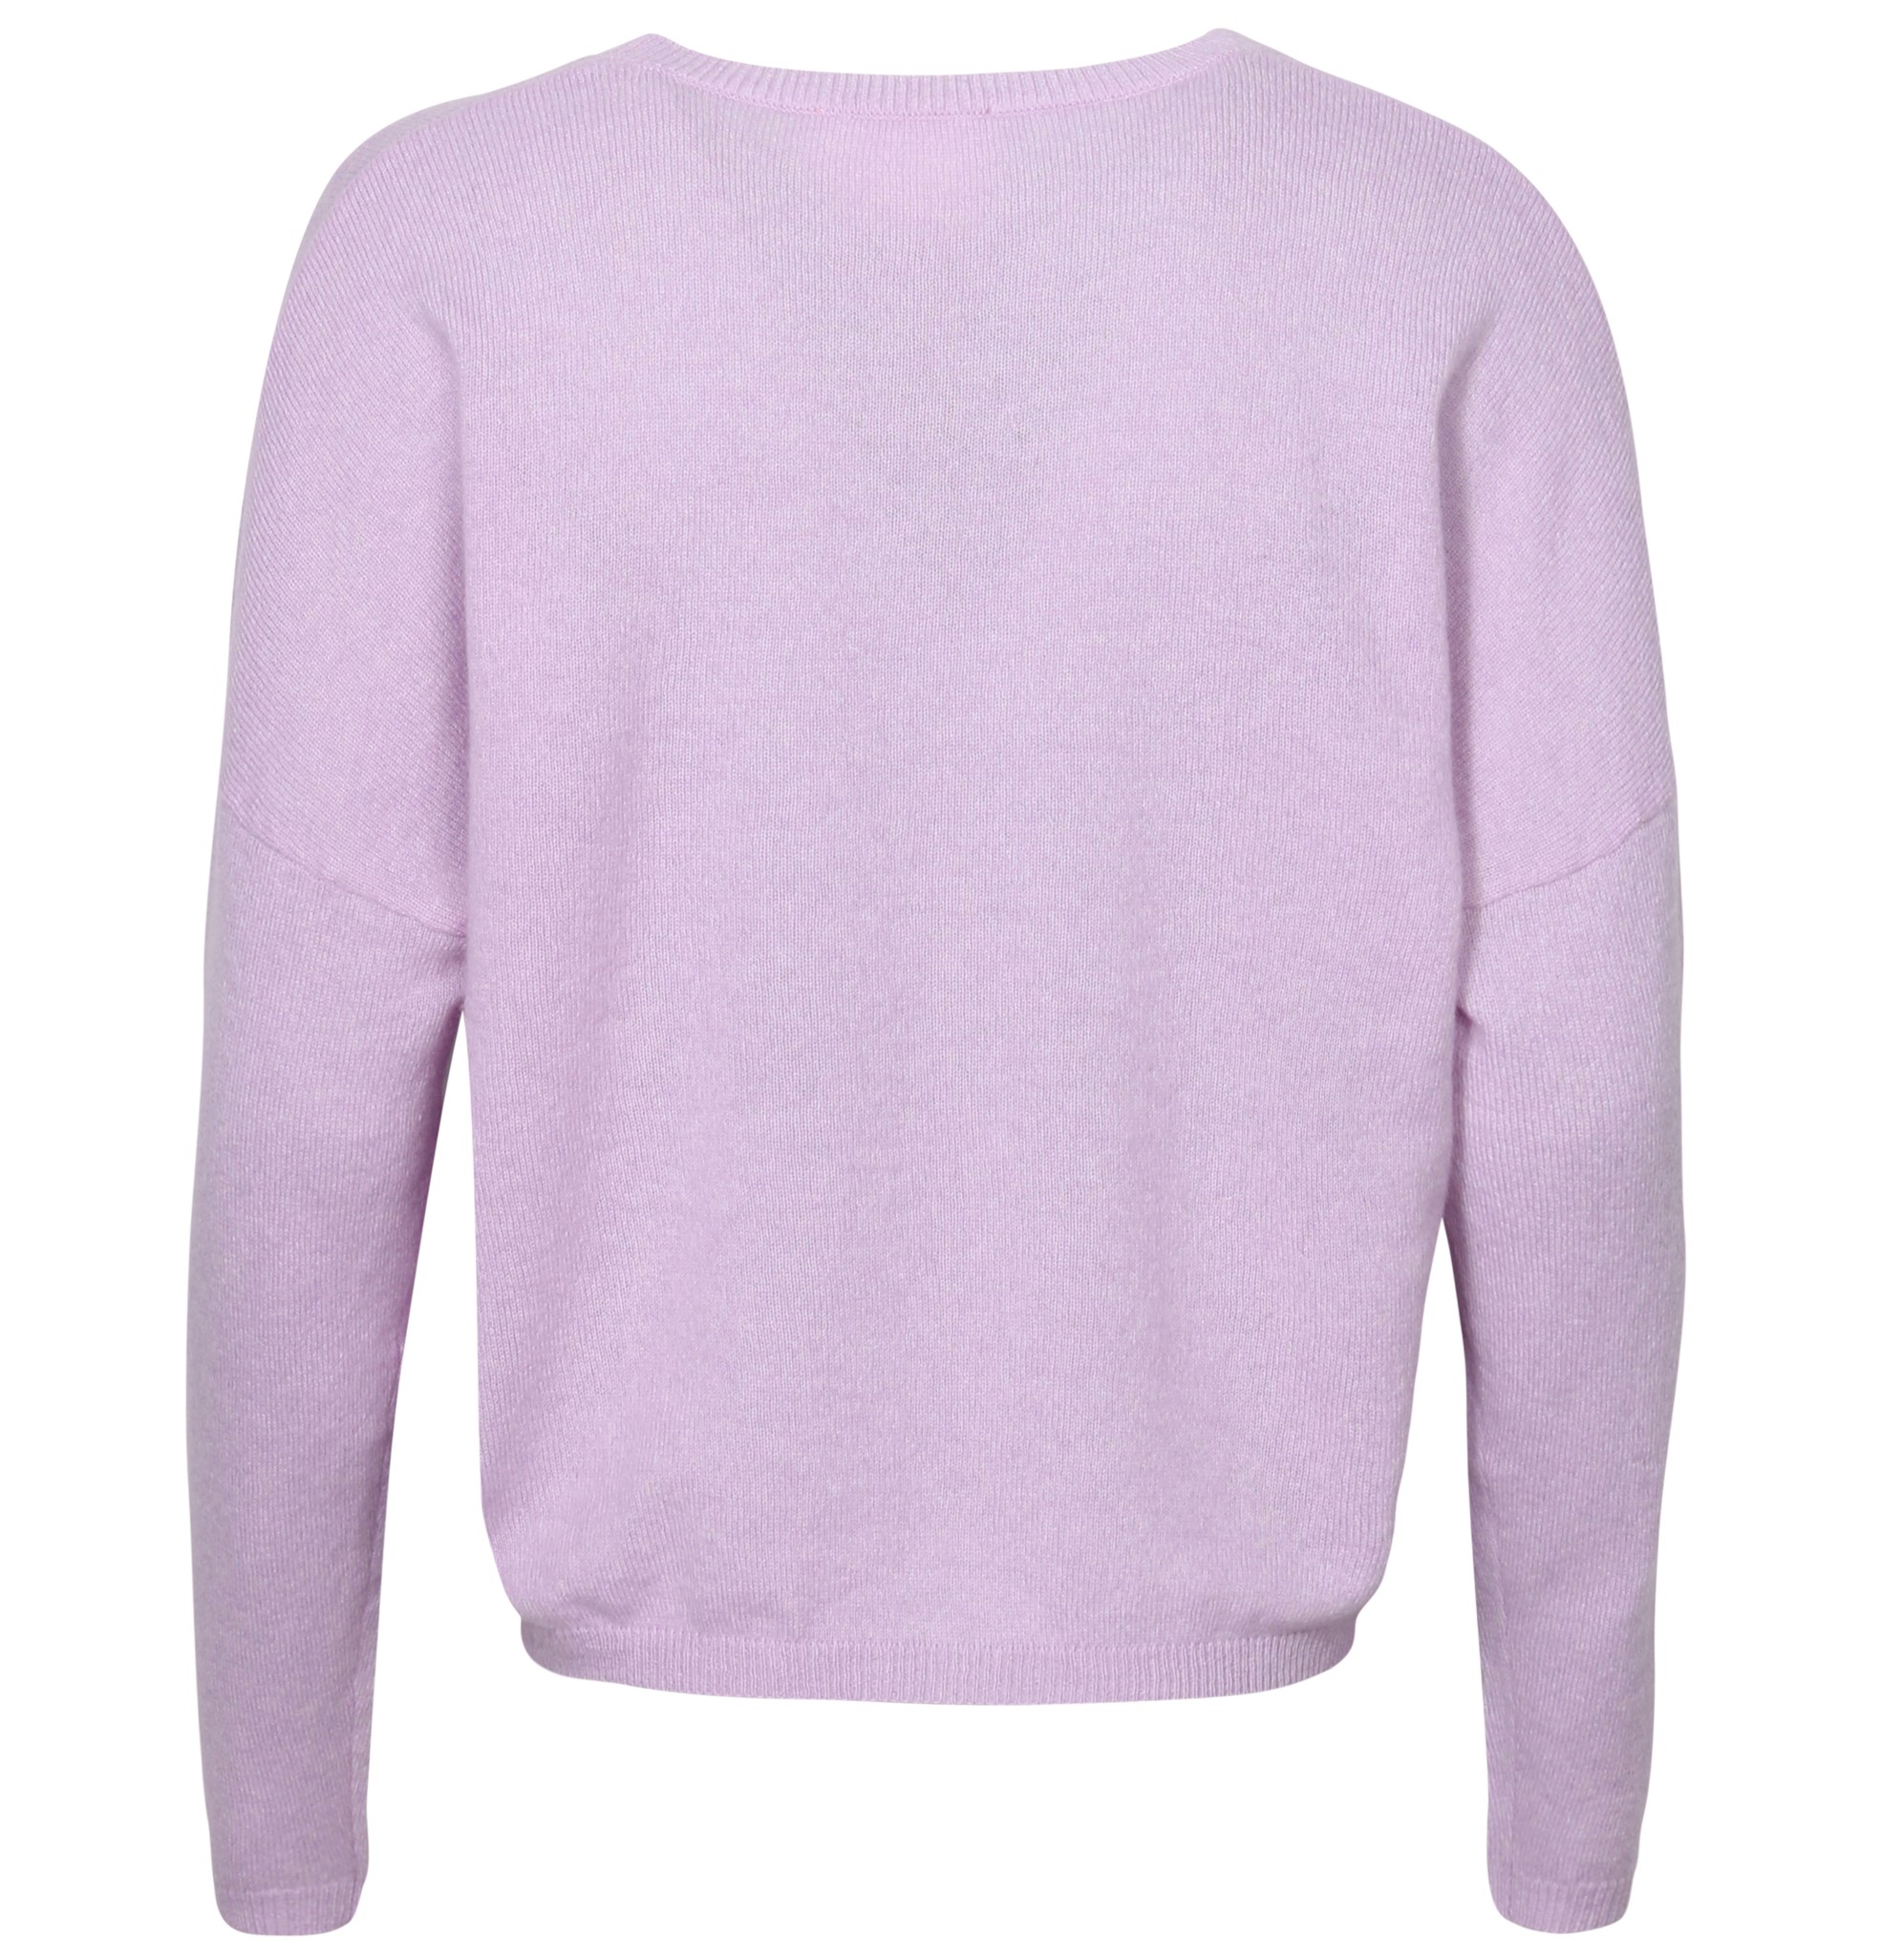 ABSOLUT CASHMERE Round Neck Sweater Kaira in Light Lilac S